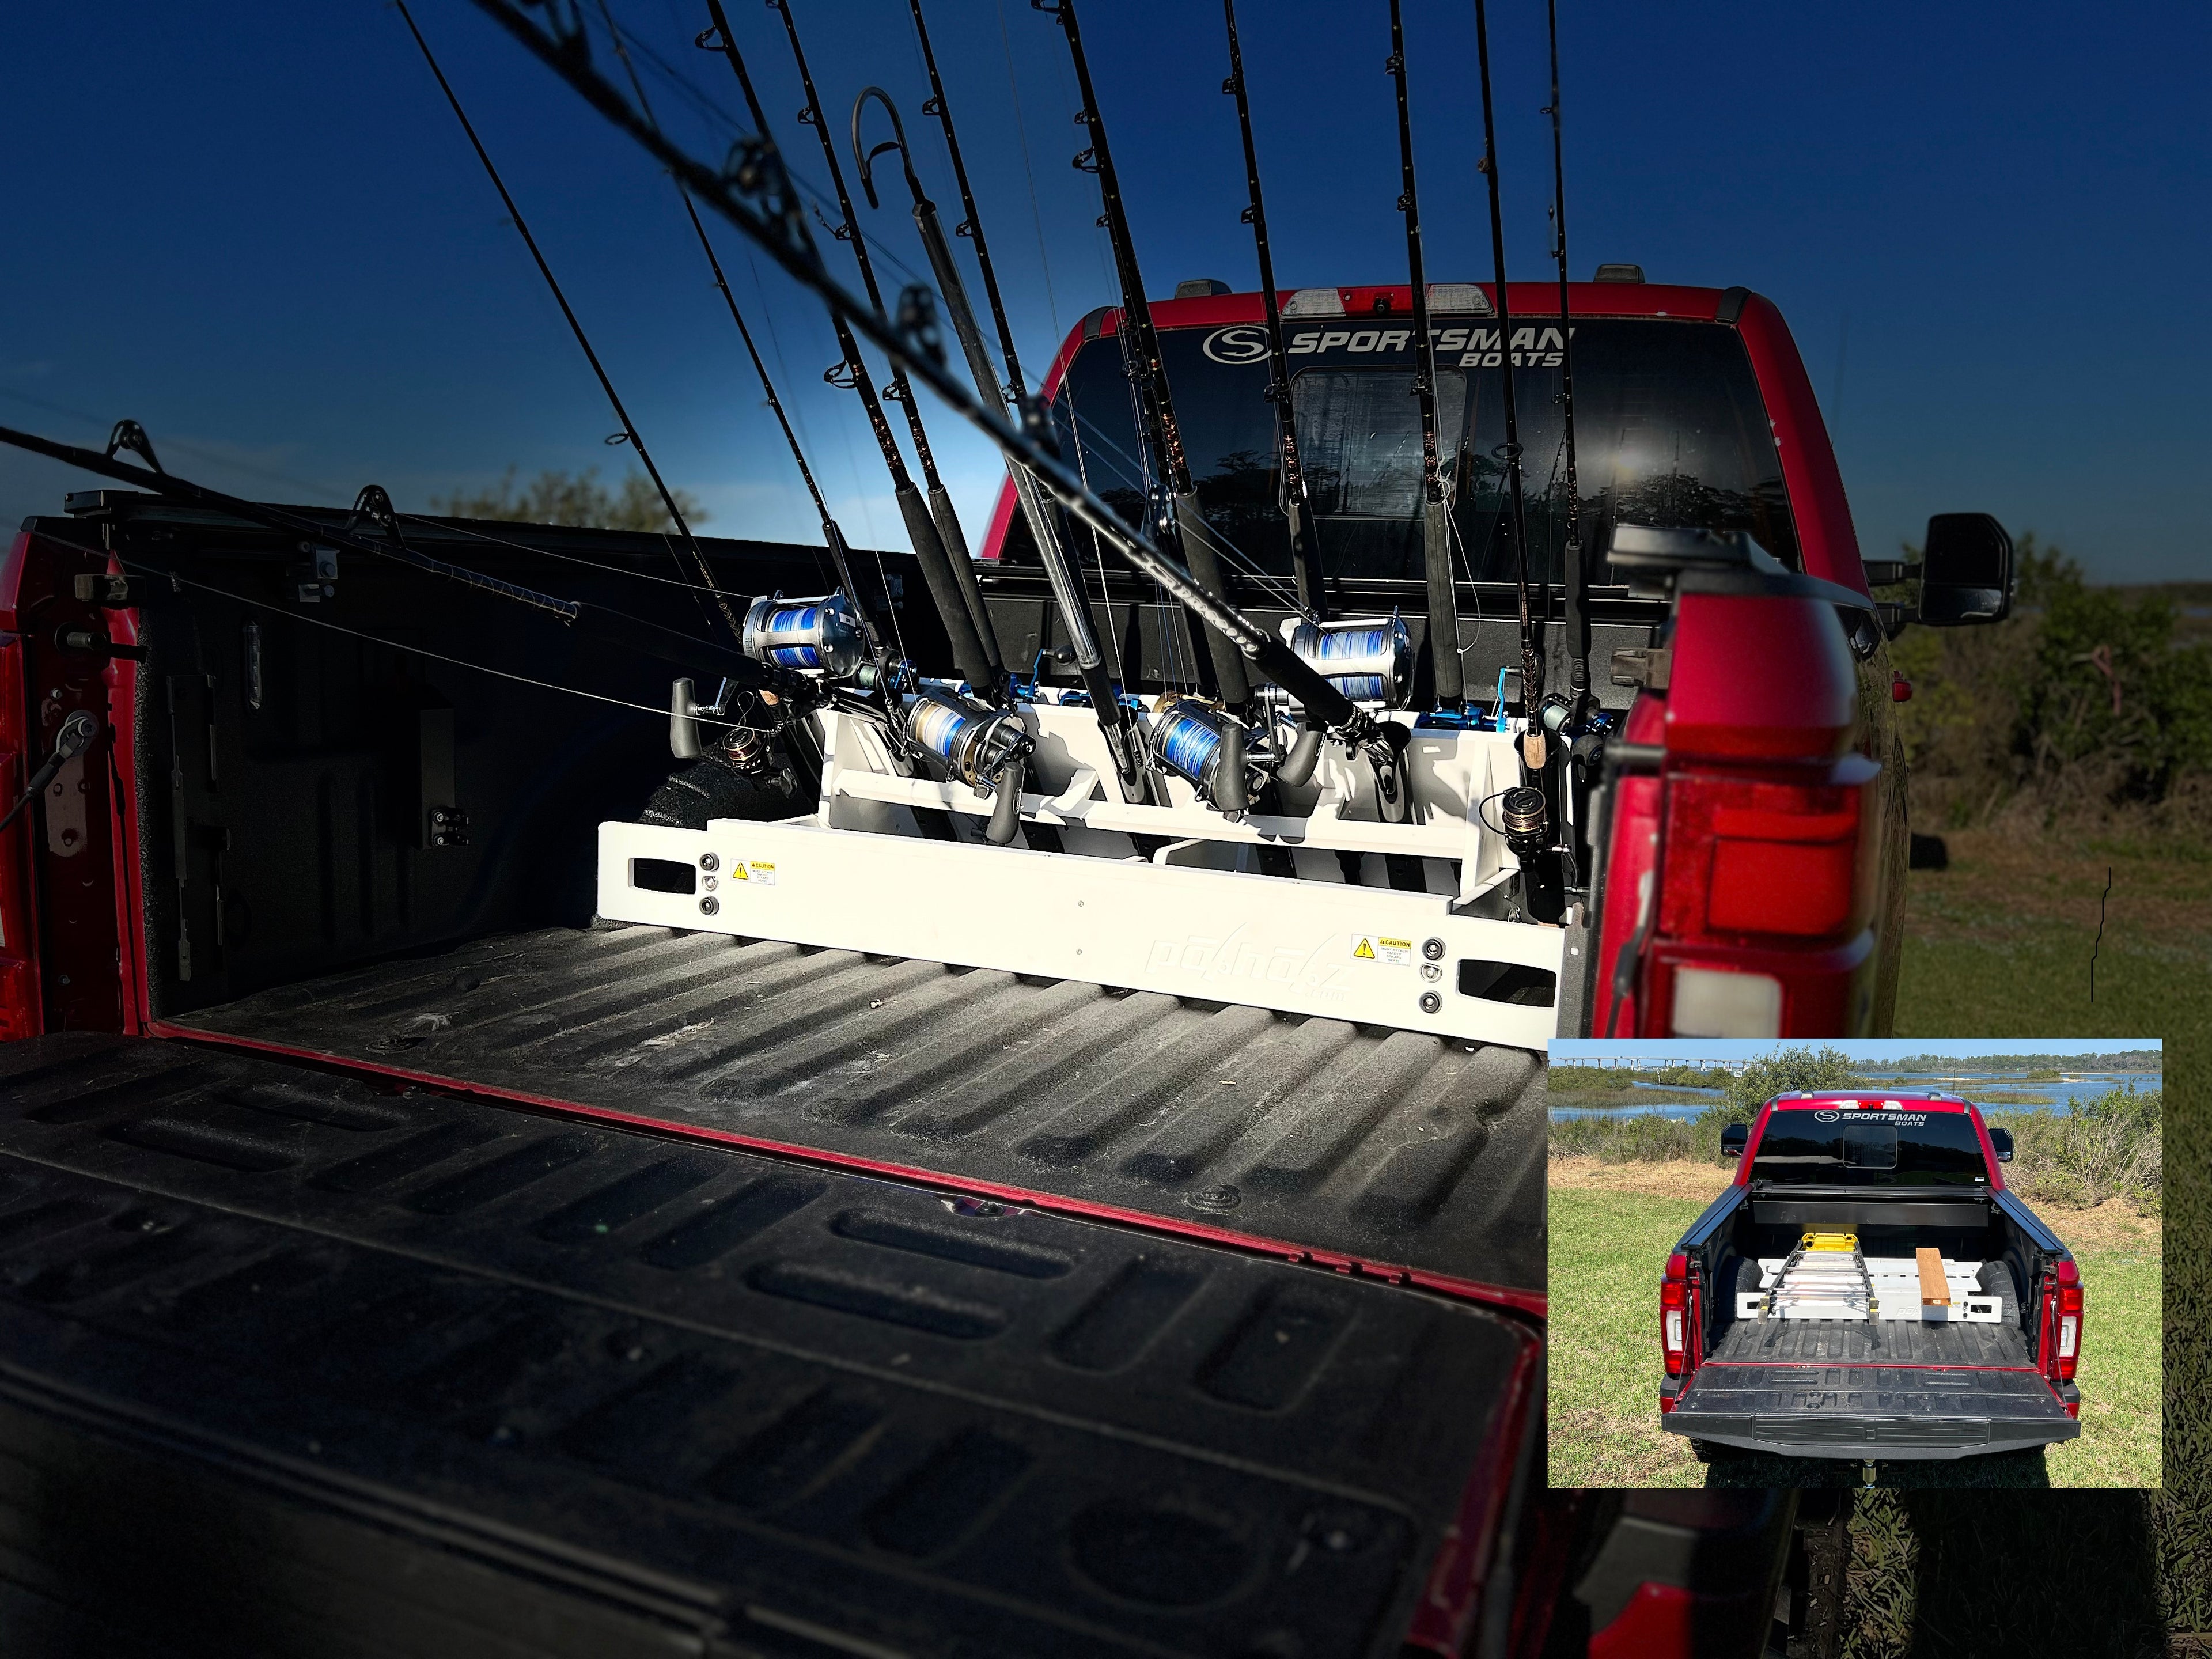 Truck Fishing Rod Holders for Convenient Storage